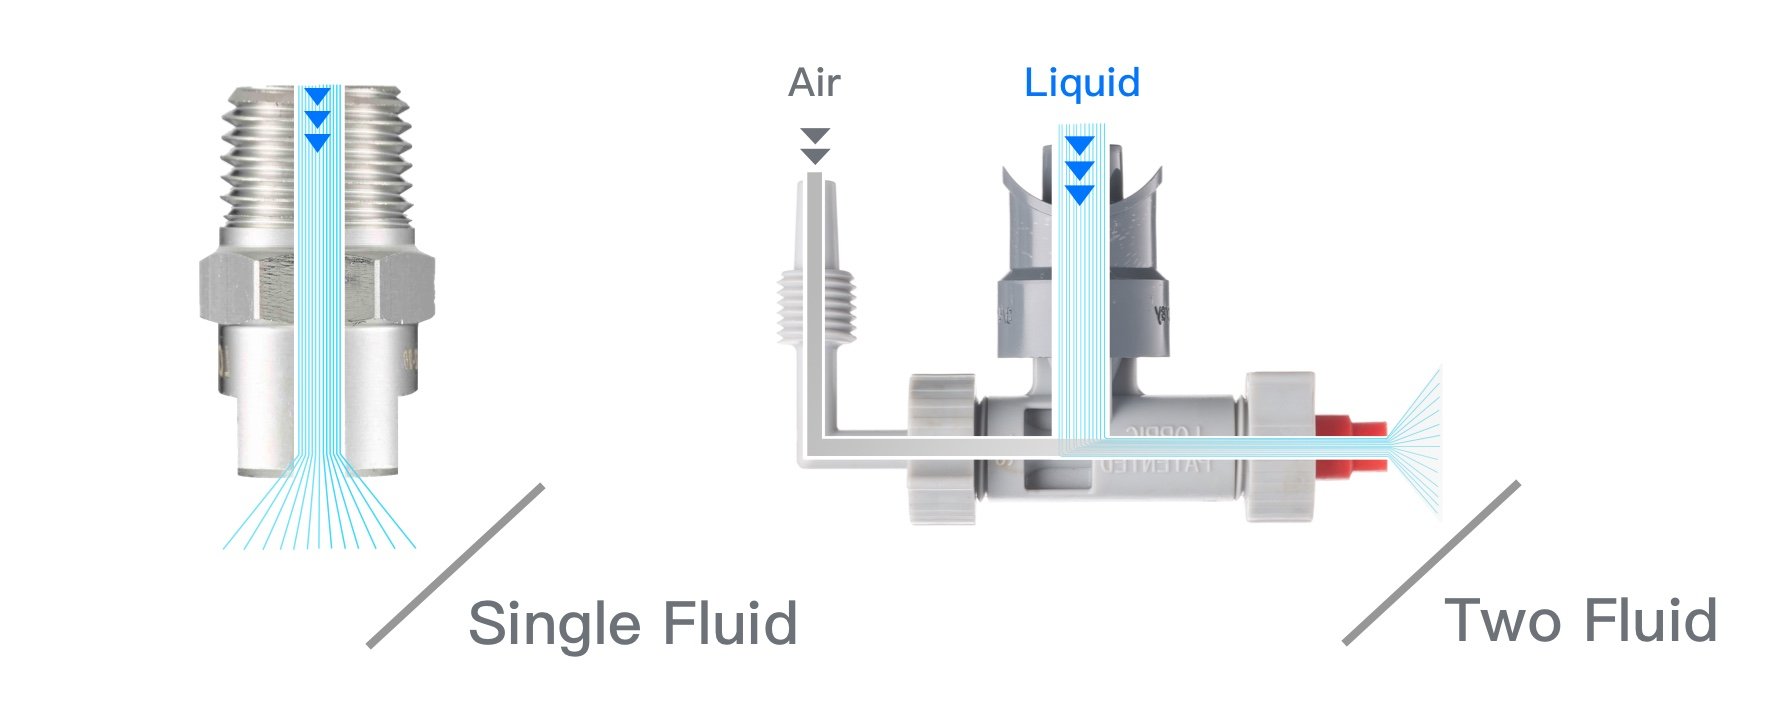 The nozzle is divided into single-fluid nozzles and two-fluid nozzles.